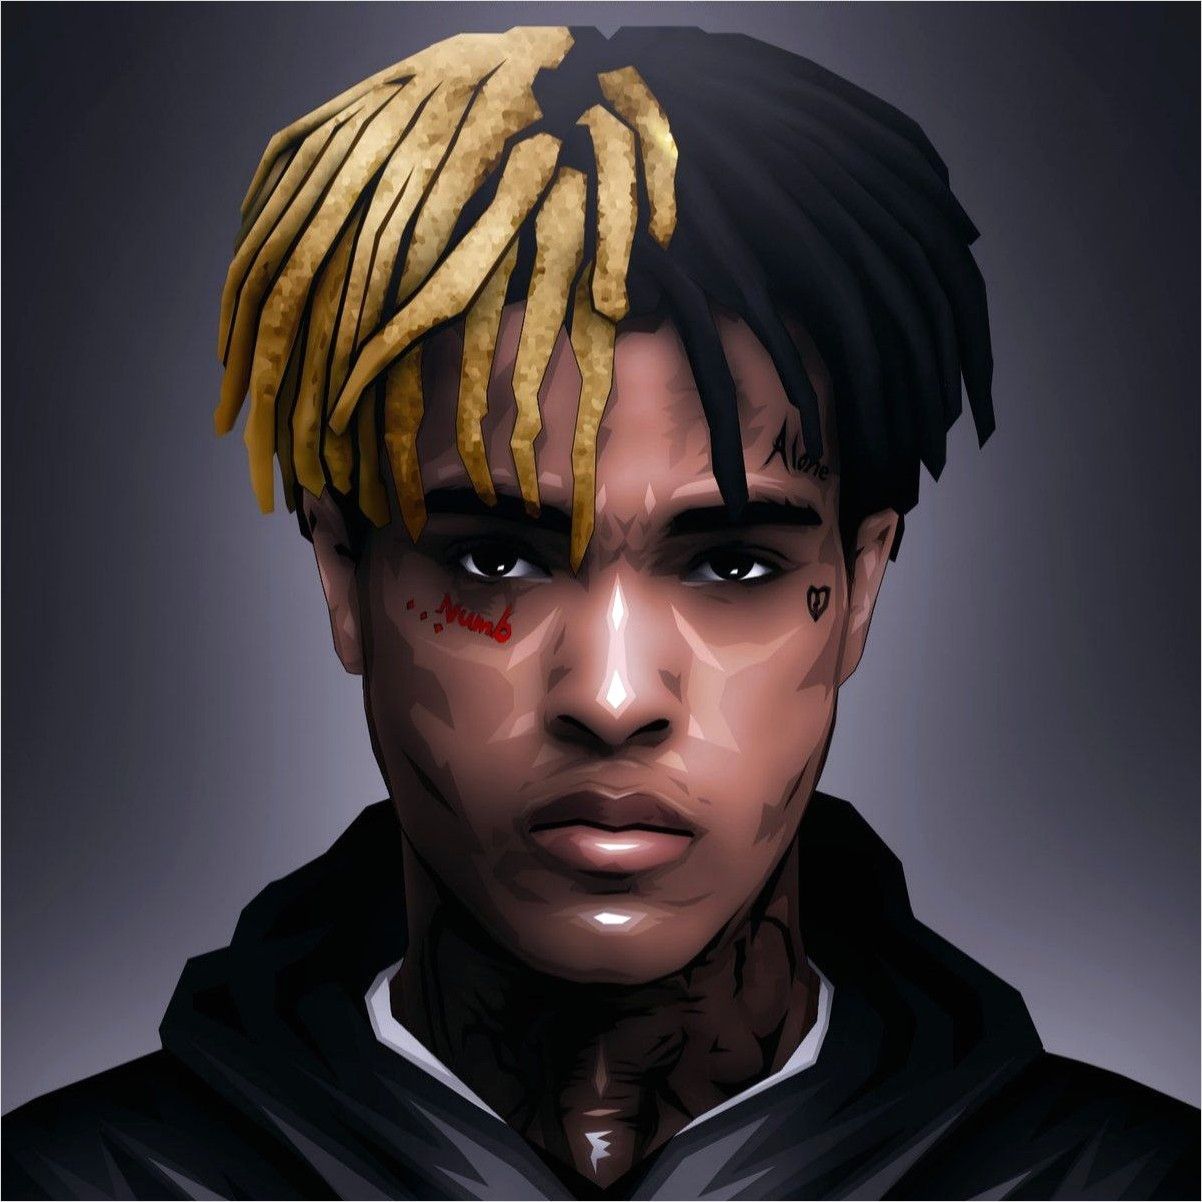 4k Pictures Xxxtentation Wallpapers 1920 1080 in 2020.